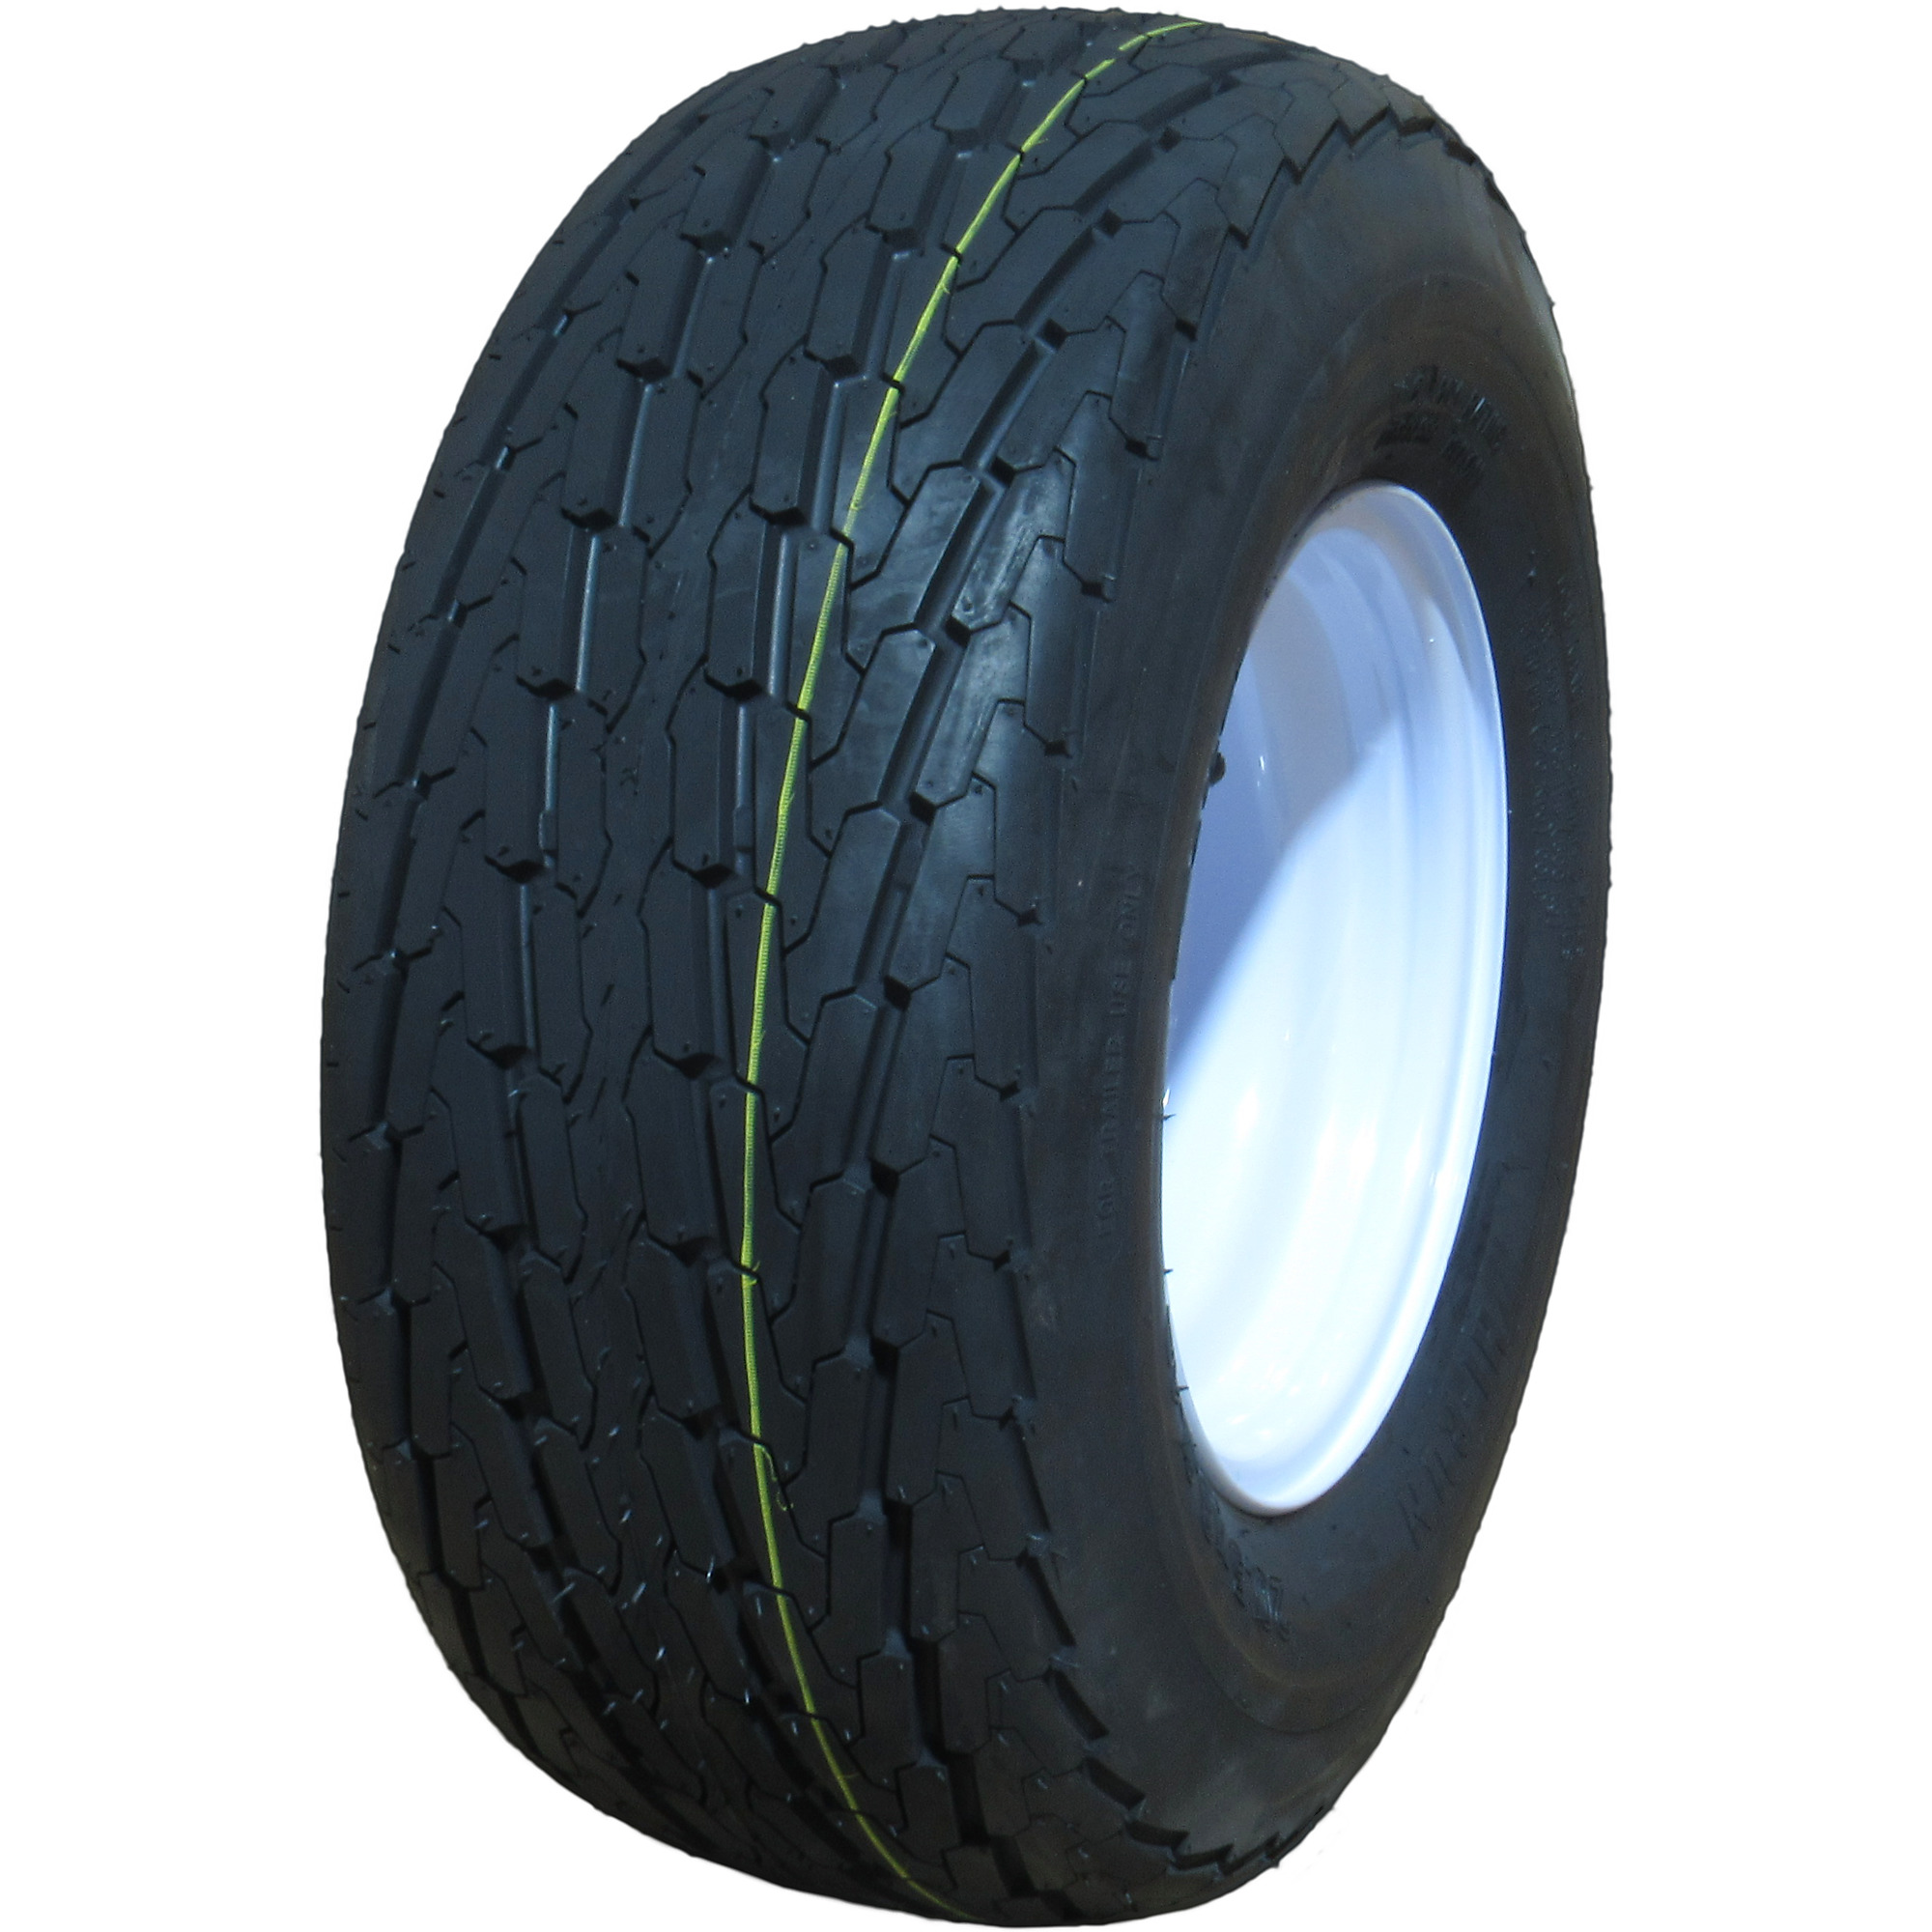 Highway Trailer Tire Assembly, Bias-Ply, Tire Size 20.5X8.00-10, Load Range Rating C, Bolt Holes (qty.) 5, Model - HI-RUN ASB1018